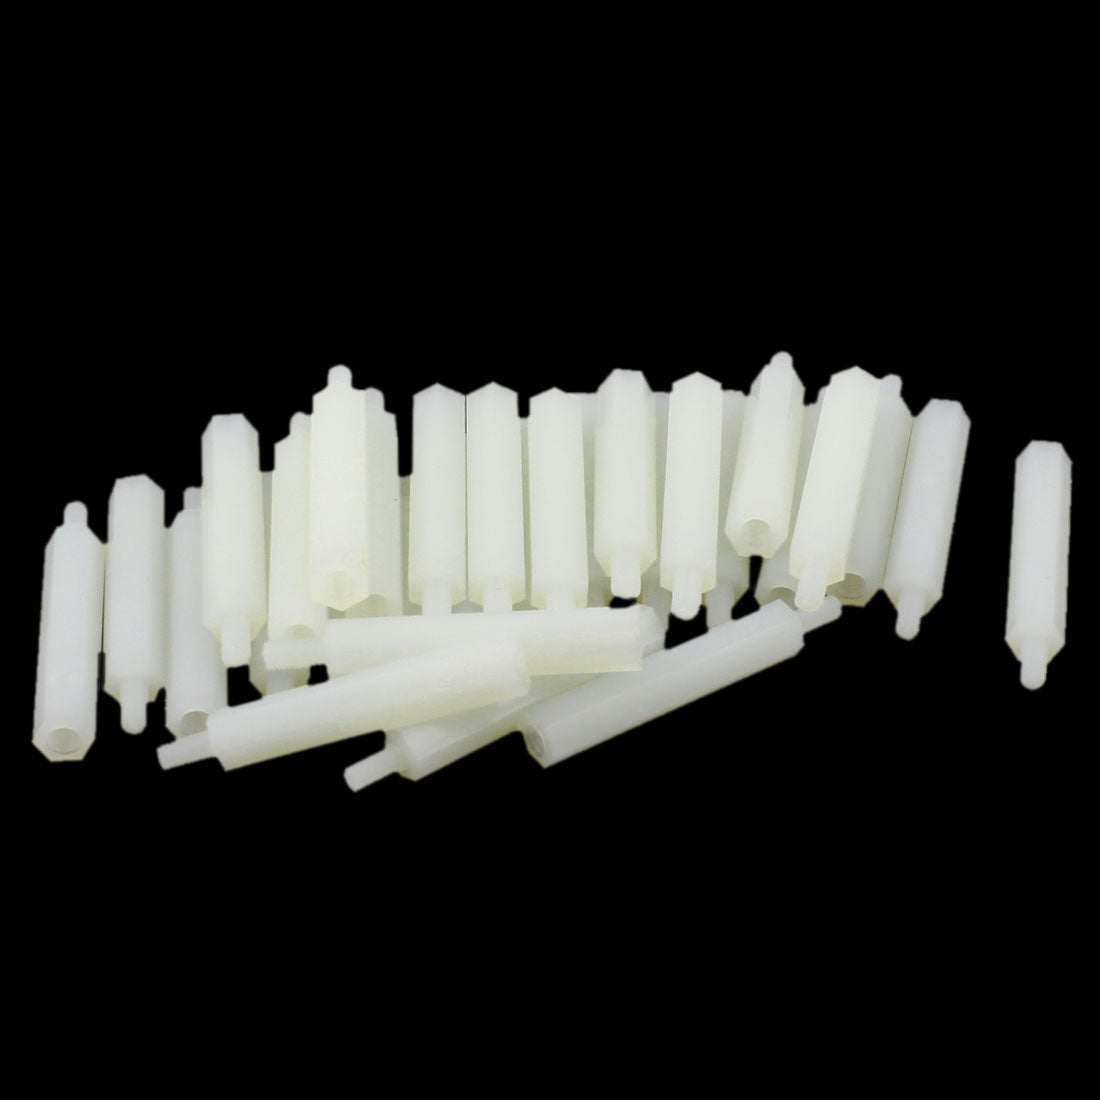 uxcell Uxcell 30 Pcs M3 30mm+6mm Female-Male White Nylon Hex PCB Stand-Off Pillar Screw Spacer